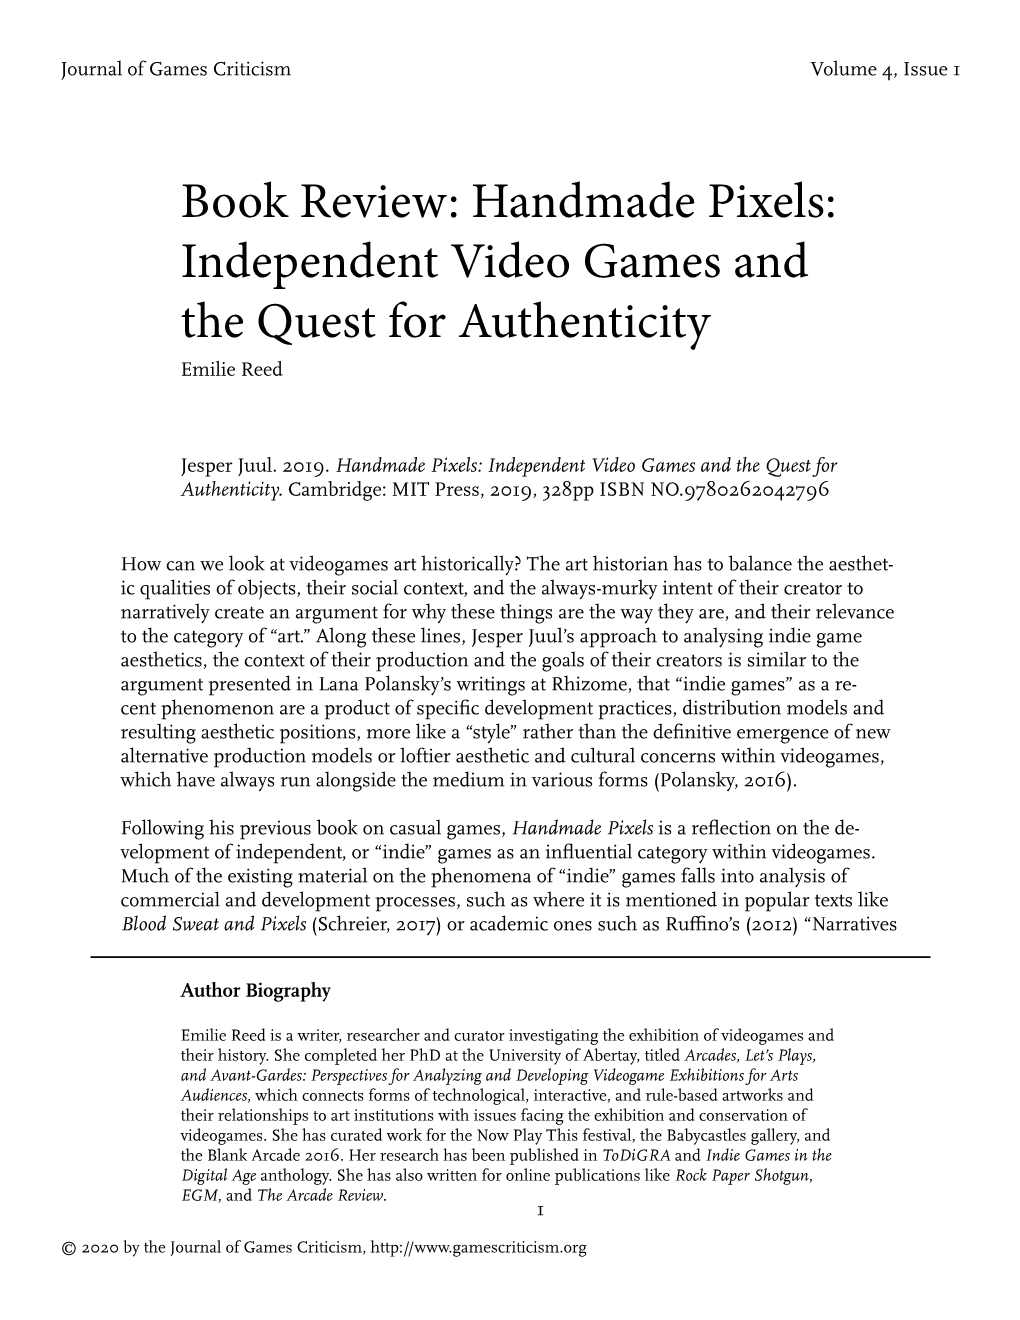 Handmade Pixels: Independent Video Games and the Quest for Authenticity